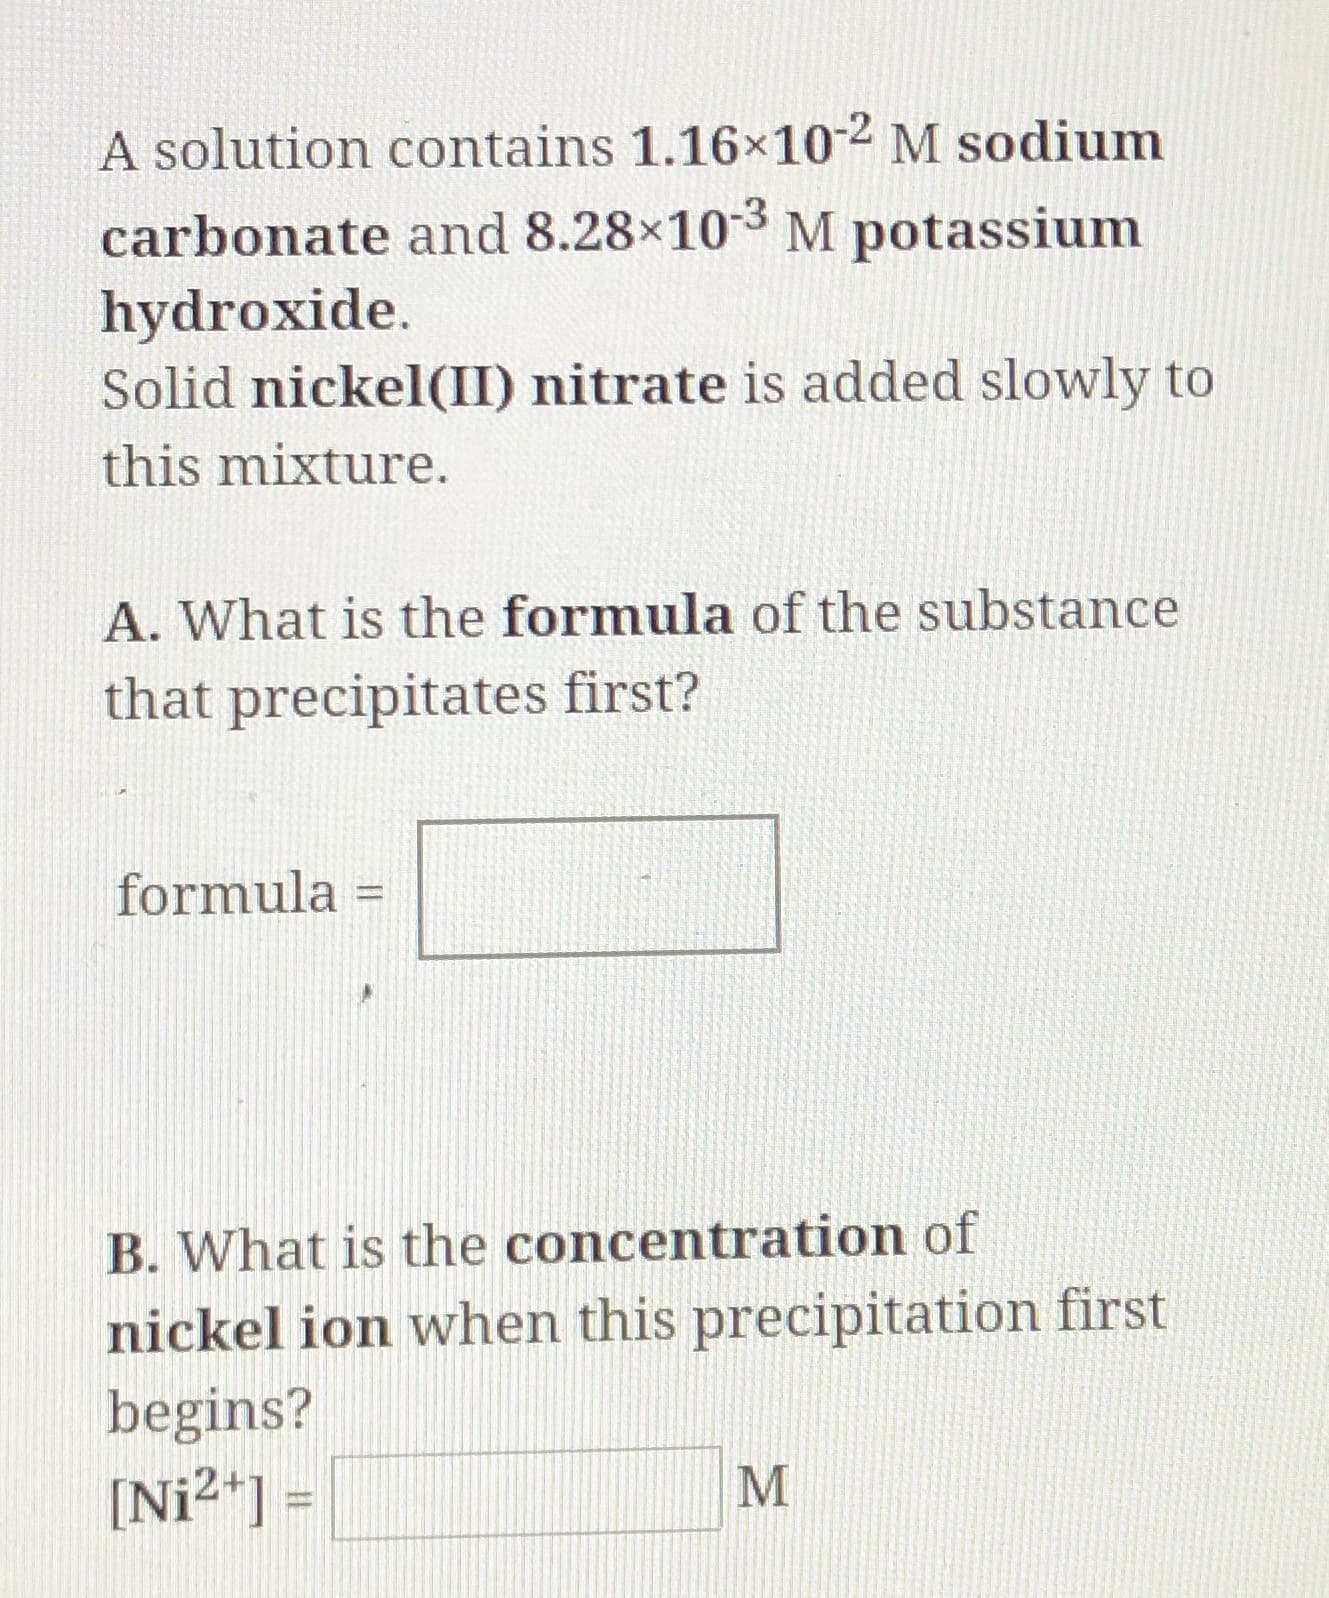 M sodium
A solution contains 1.16x10
carbonate and 8.28x103 M potassium
hydroxide.
Solid nickel(II) nitrate is added slowly to
this mixture.
A. What is the formula of the substance
that precipitates first?
formula
11
B. What is the concentration of
nickel ion when this precipitation first
begins?
[Ni2 ] =
